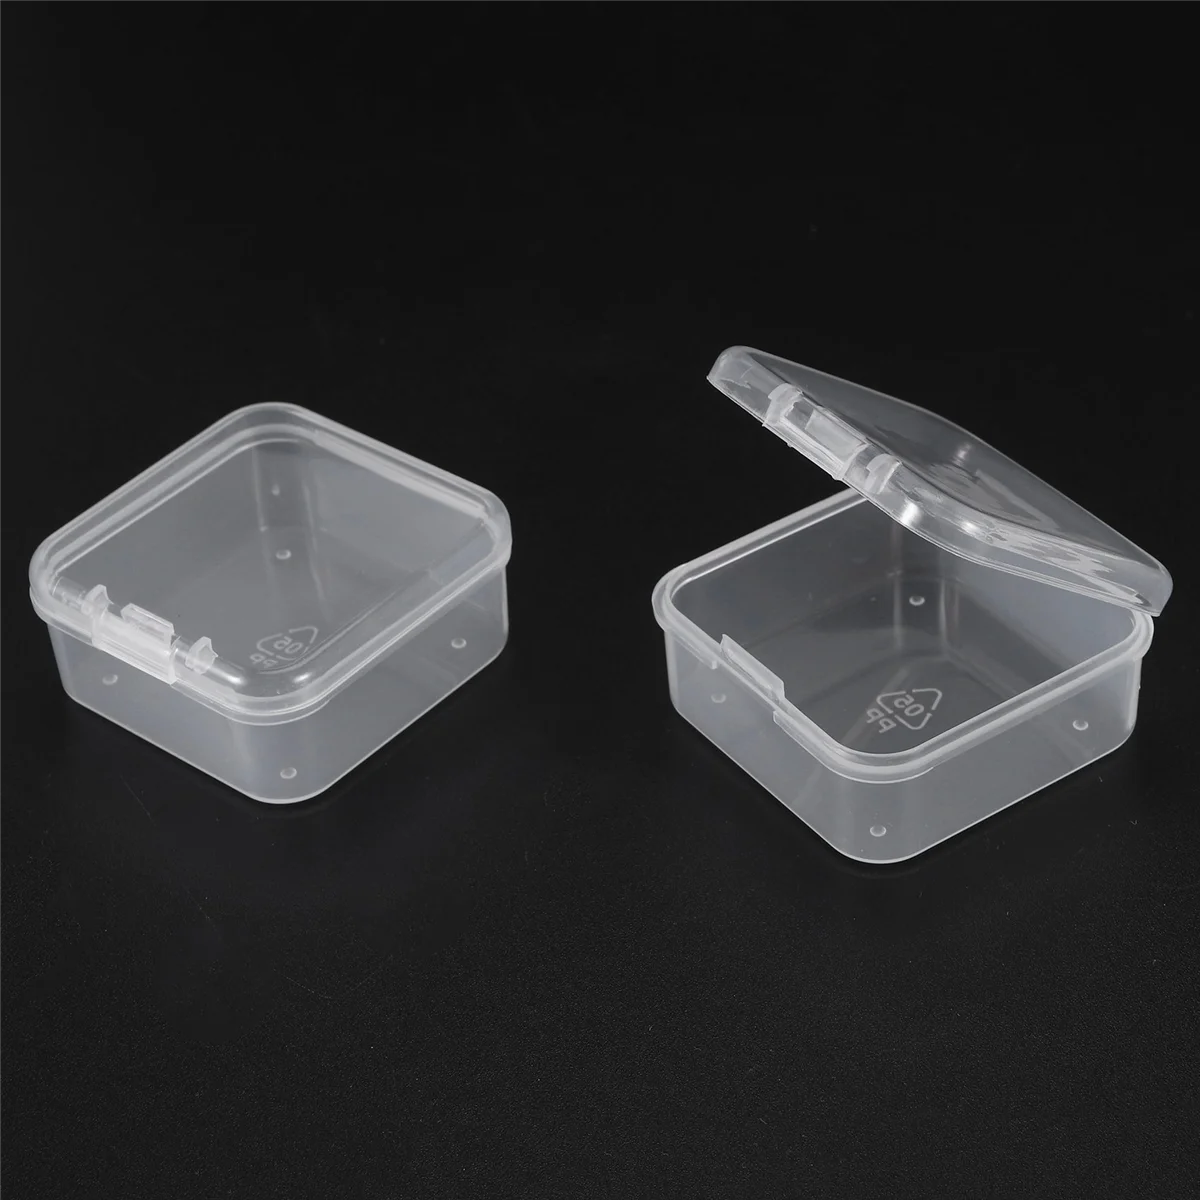 Rcybeo 16 Pcs Mini Plastic Containers Boxes with Lids, 4.5x3.4 Inches Clear  Small Storage Box for Collecting Small Items, Beads, Jewelry, Crafts